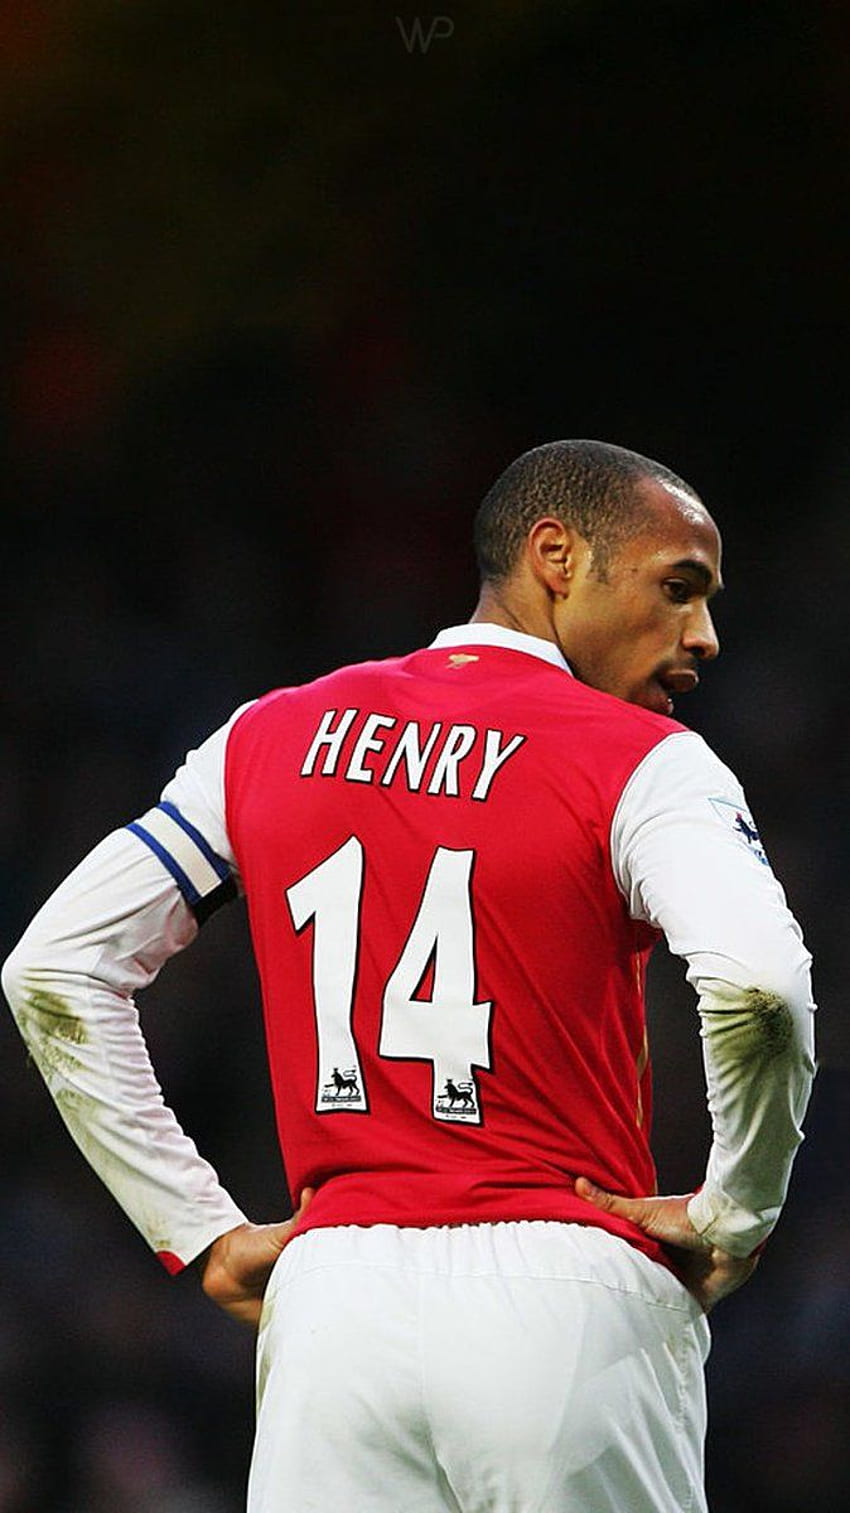 . Thierry Henry Tweet added by WP - HD phone wallpaper